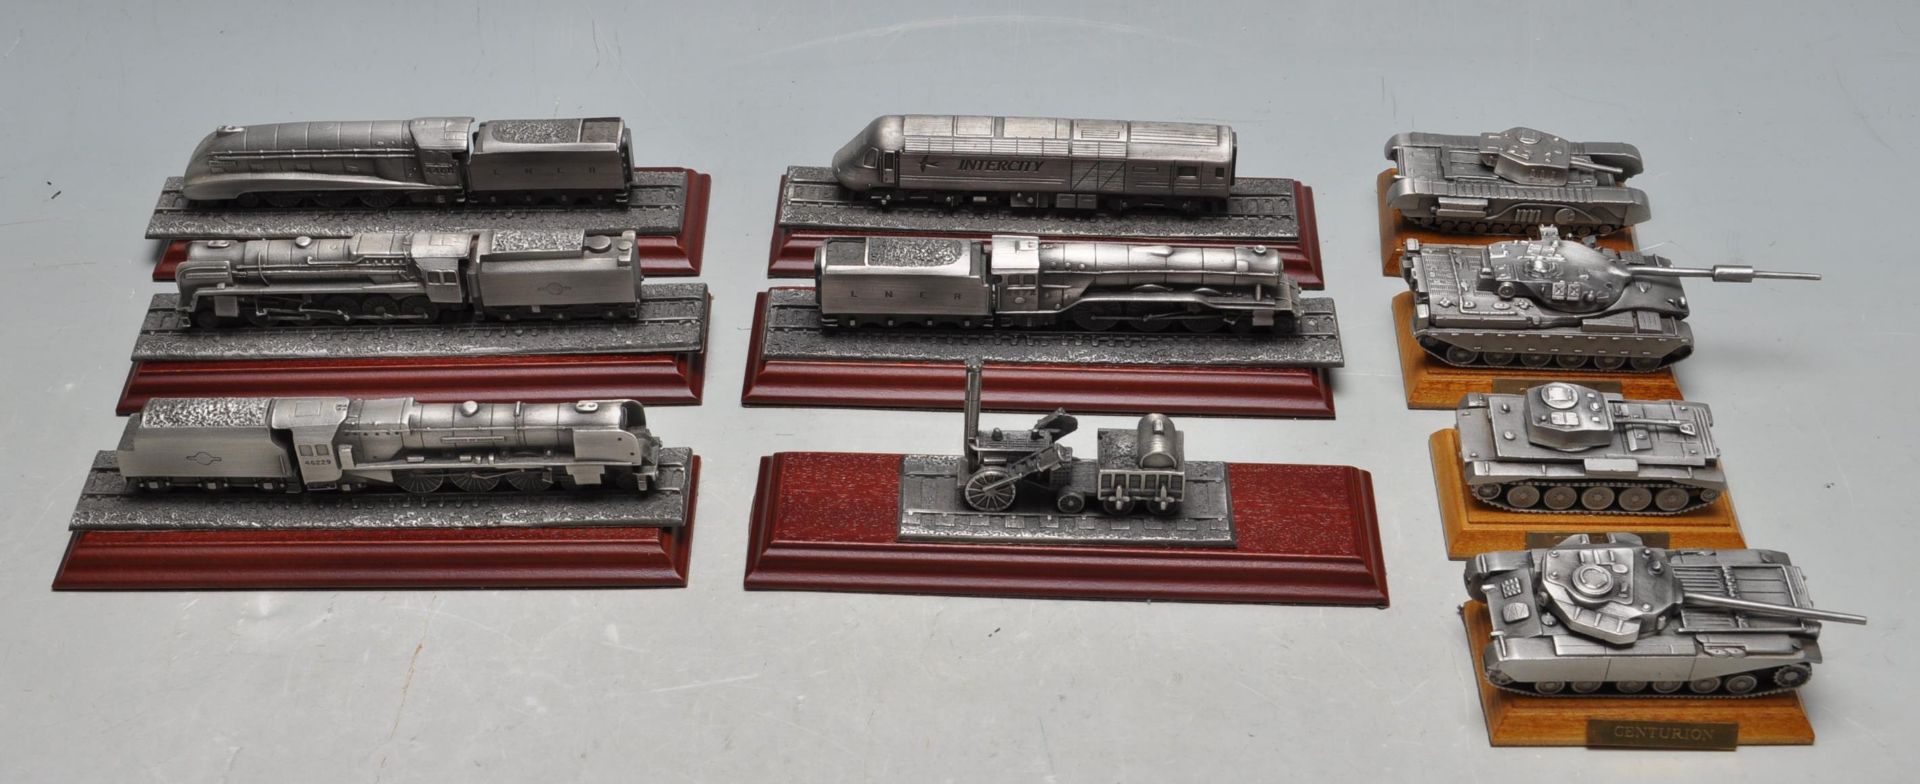 COLLECTION OF ROYAL HAMPSHIRE ART FOUNDRY PEWTER TRAINS AND LOCOMOTIVES